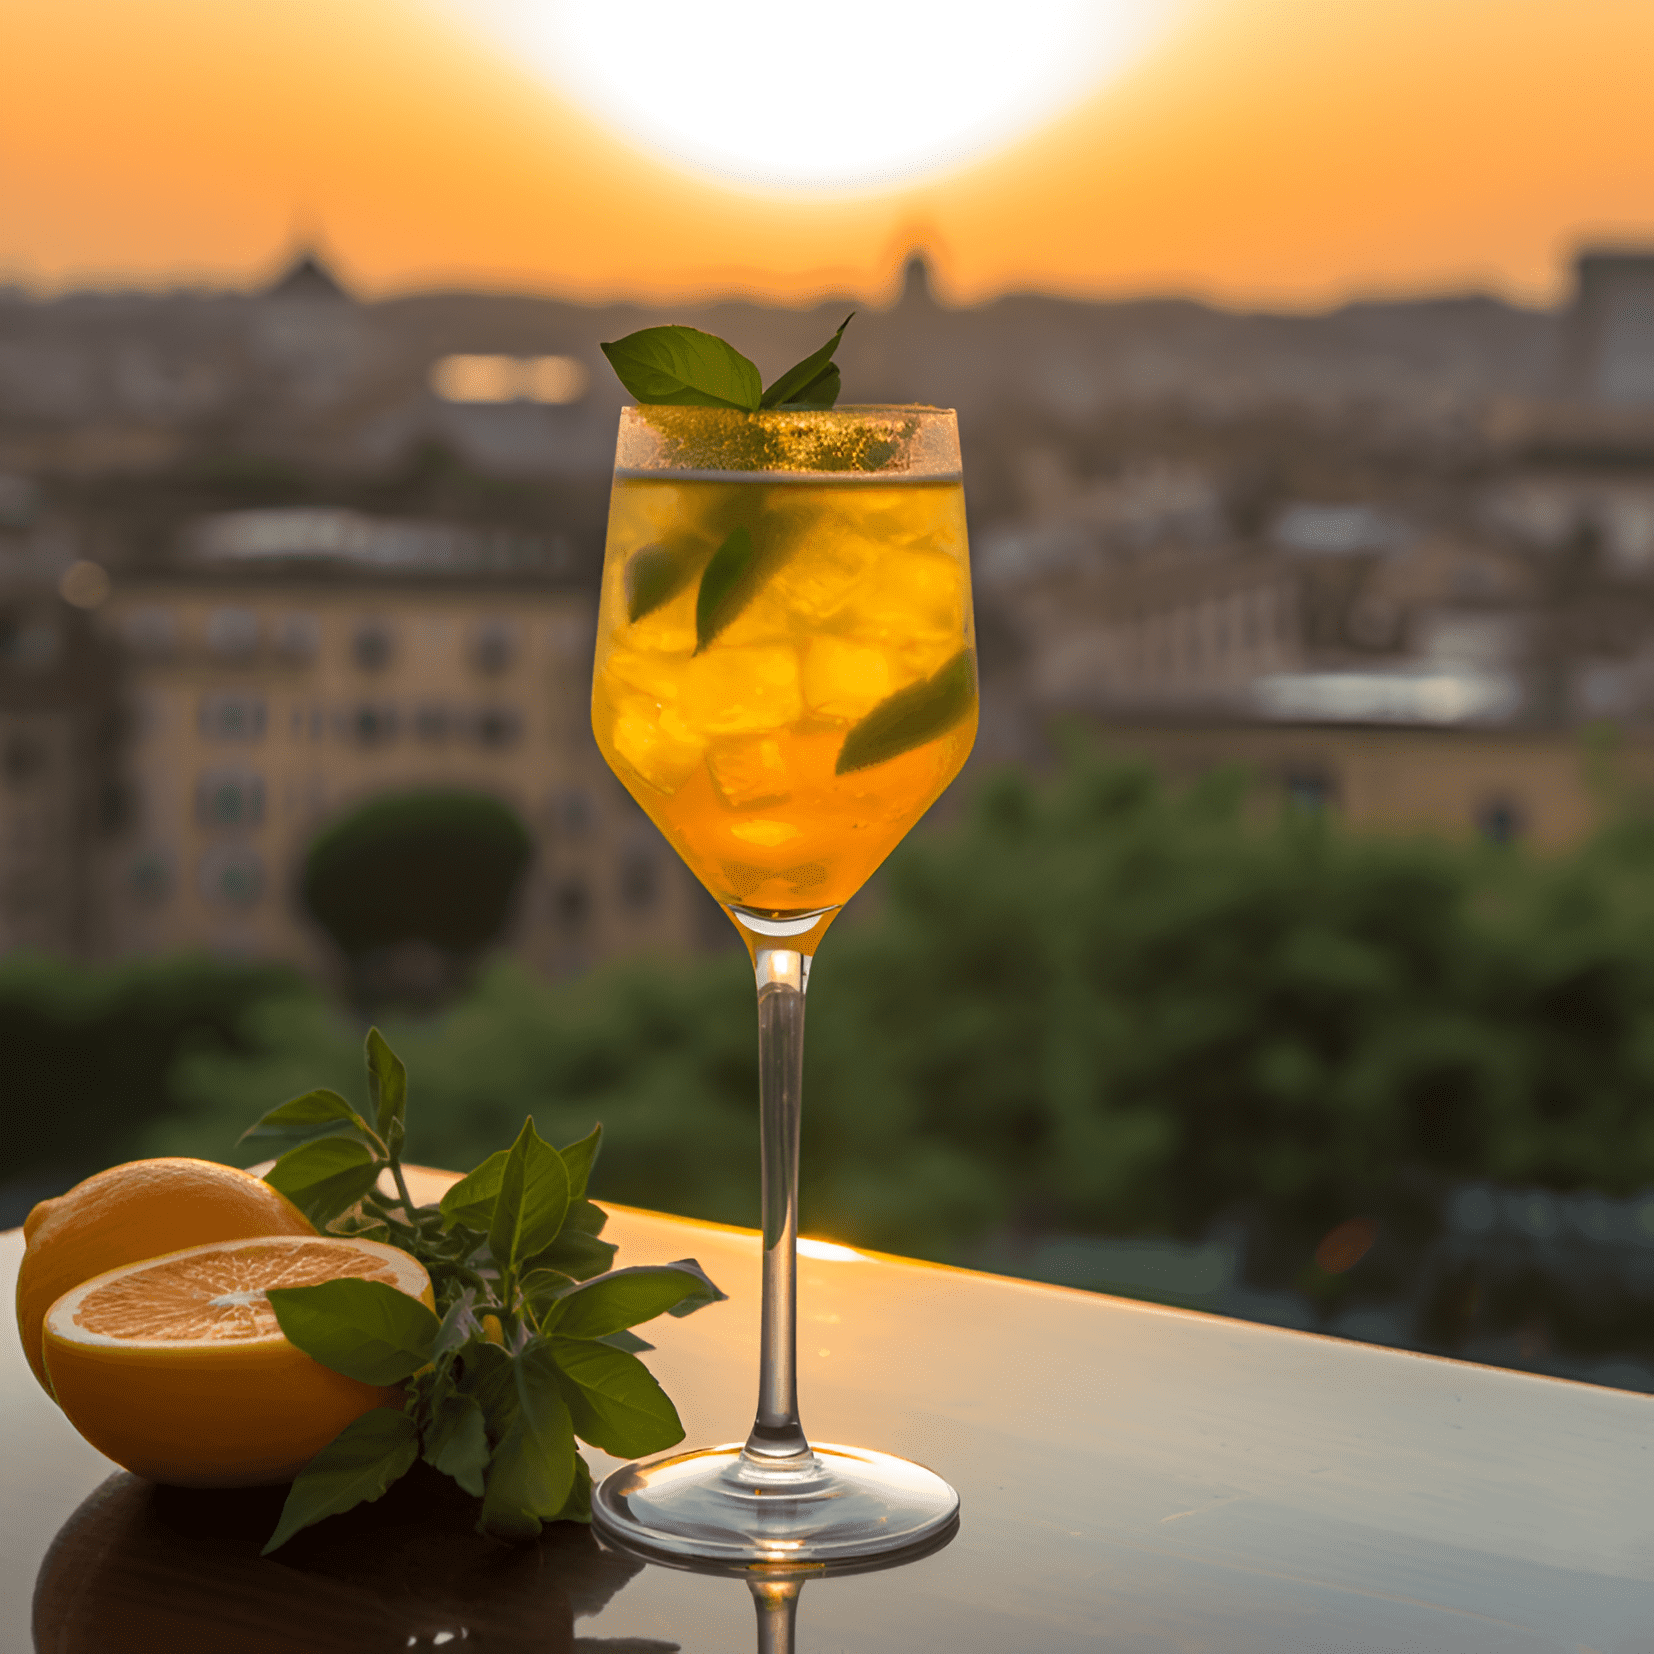 Rome with a View Cocktail Recipe - Rome with a View has a bright, citrusy, and slightly bitter taste. It is a well-balanced cocktail with a refreshing and crisp finish. The combination of Aperol, lime, and mint gives it a zesty and invigorating flavor, while the Prosecco adds a touch of sweetness and effervescence.